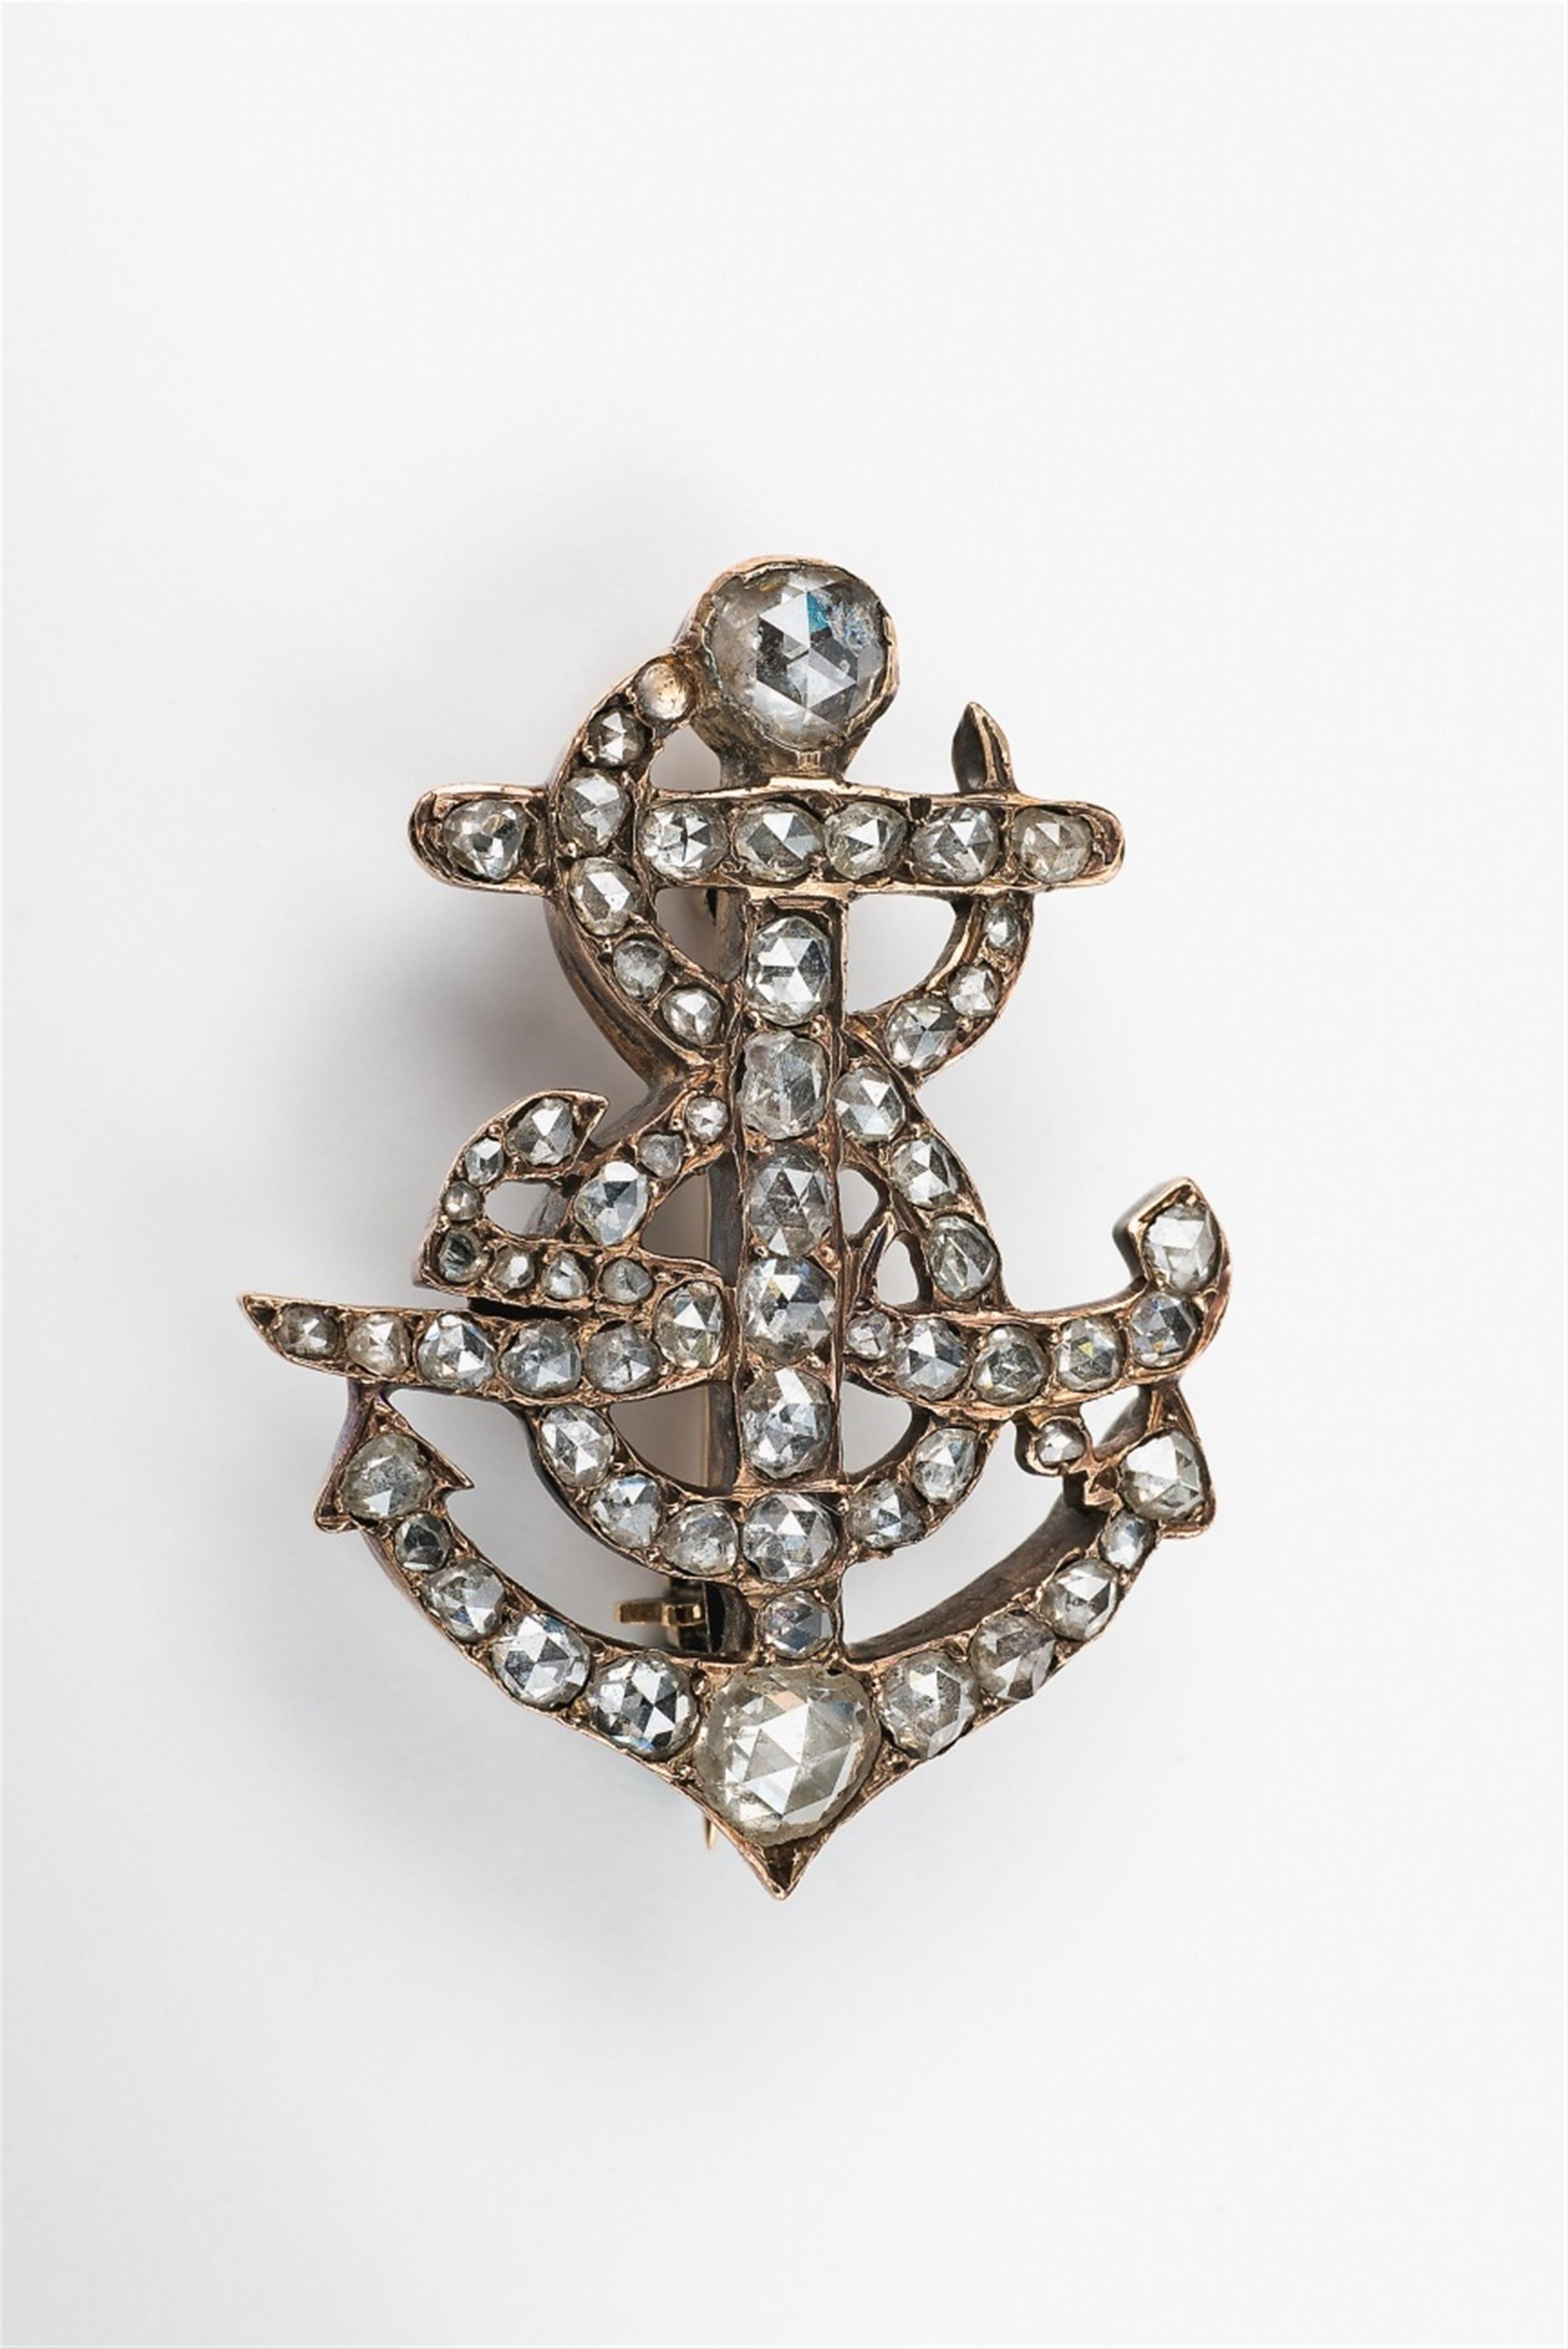 A 14k red gold and diamond anchor brooch - image-1